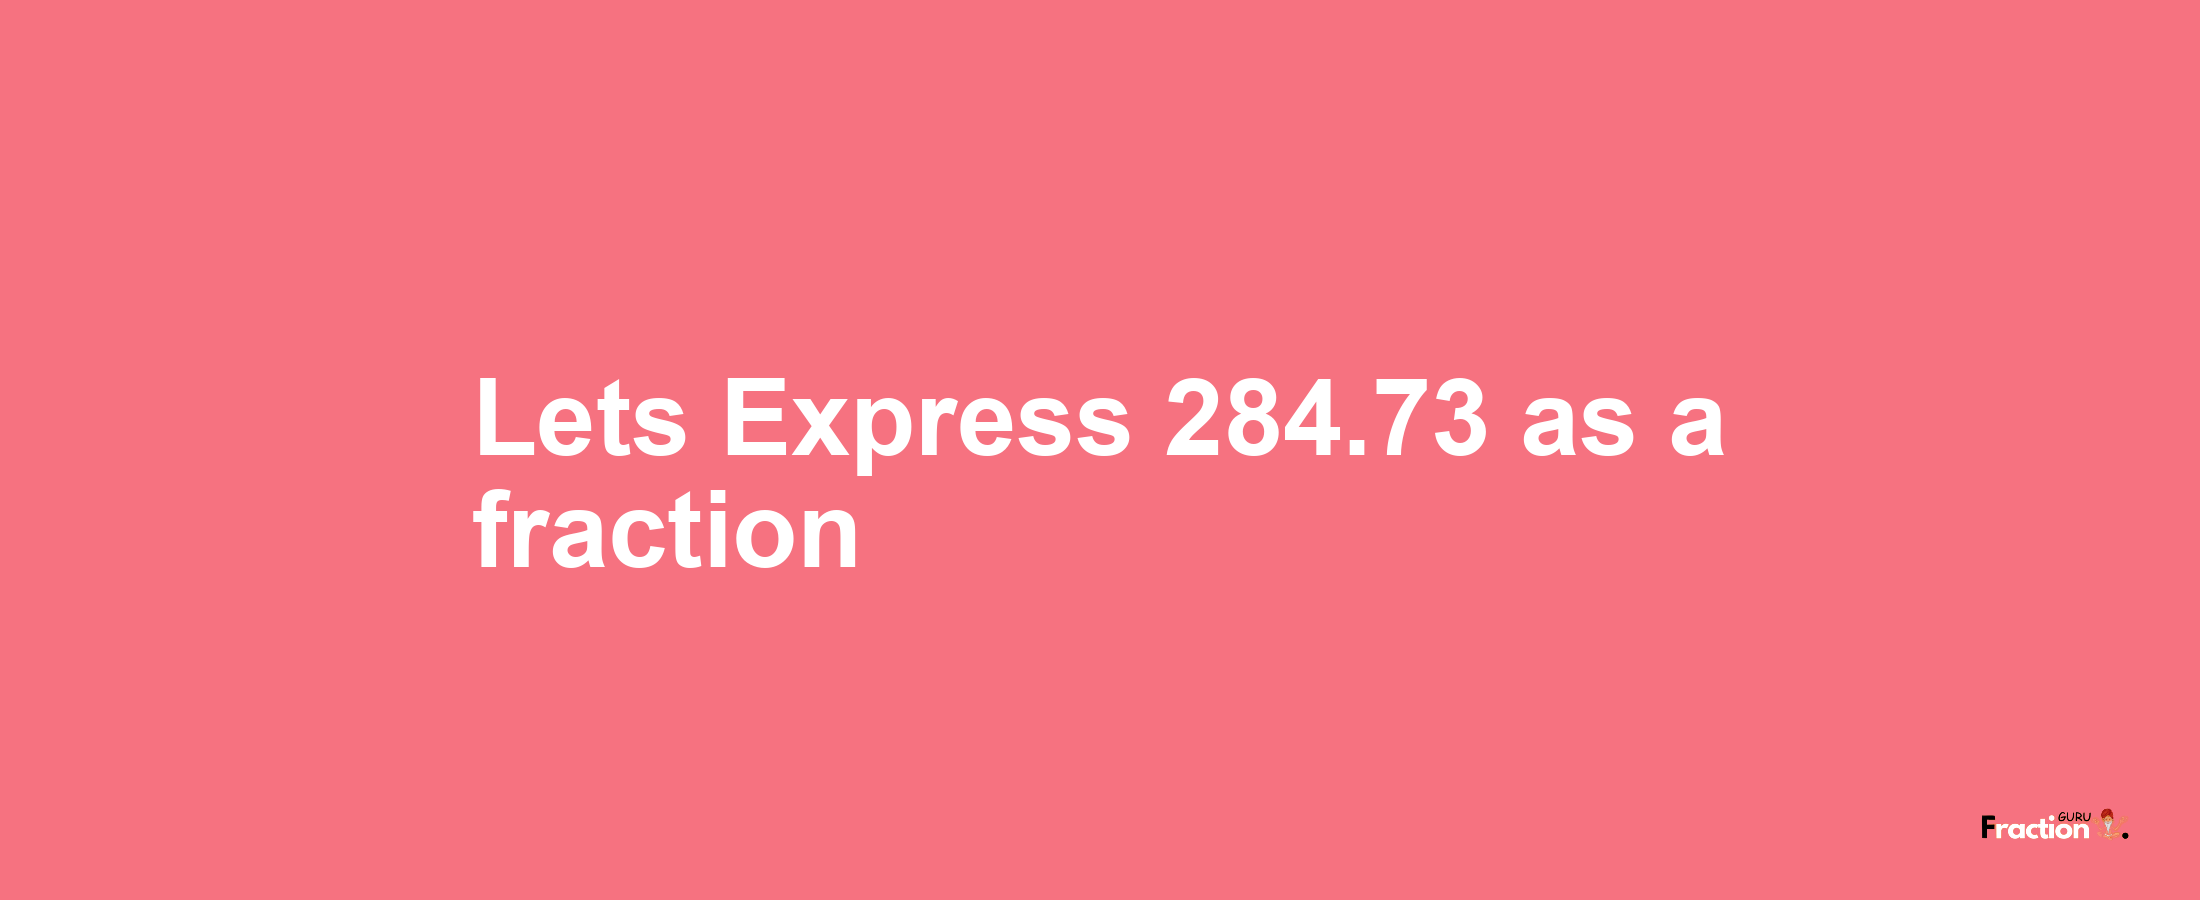 Lets Express 284.73 as afraction